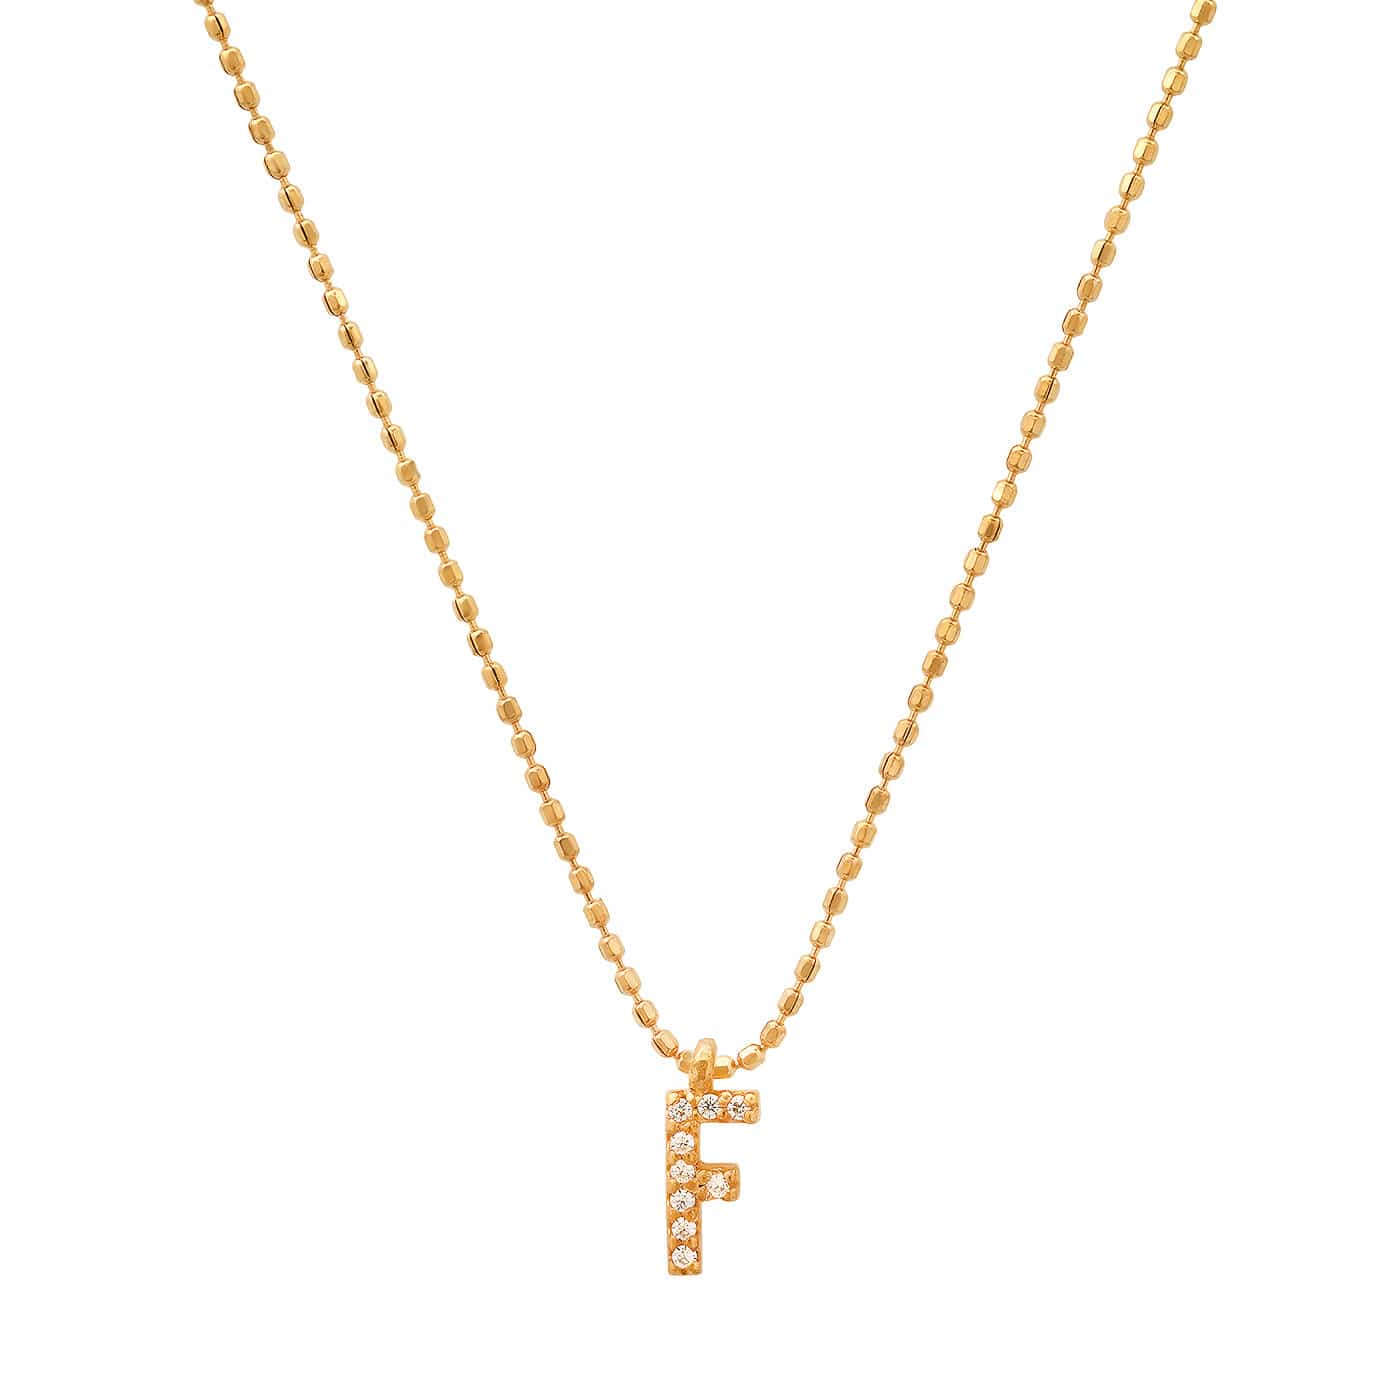 TAI JEWELRY Necklace F Pave Initial Ball Chain Necklace